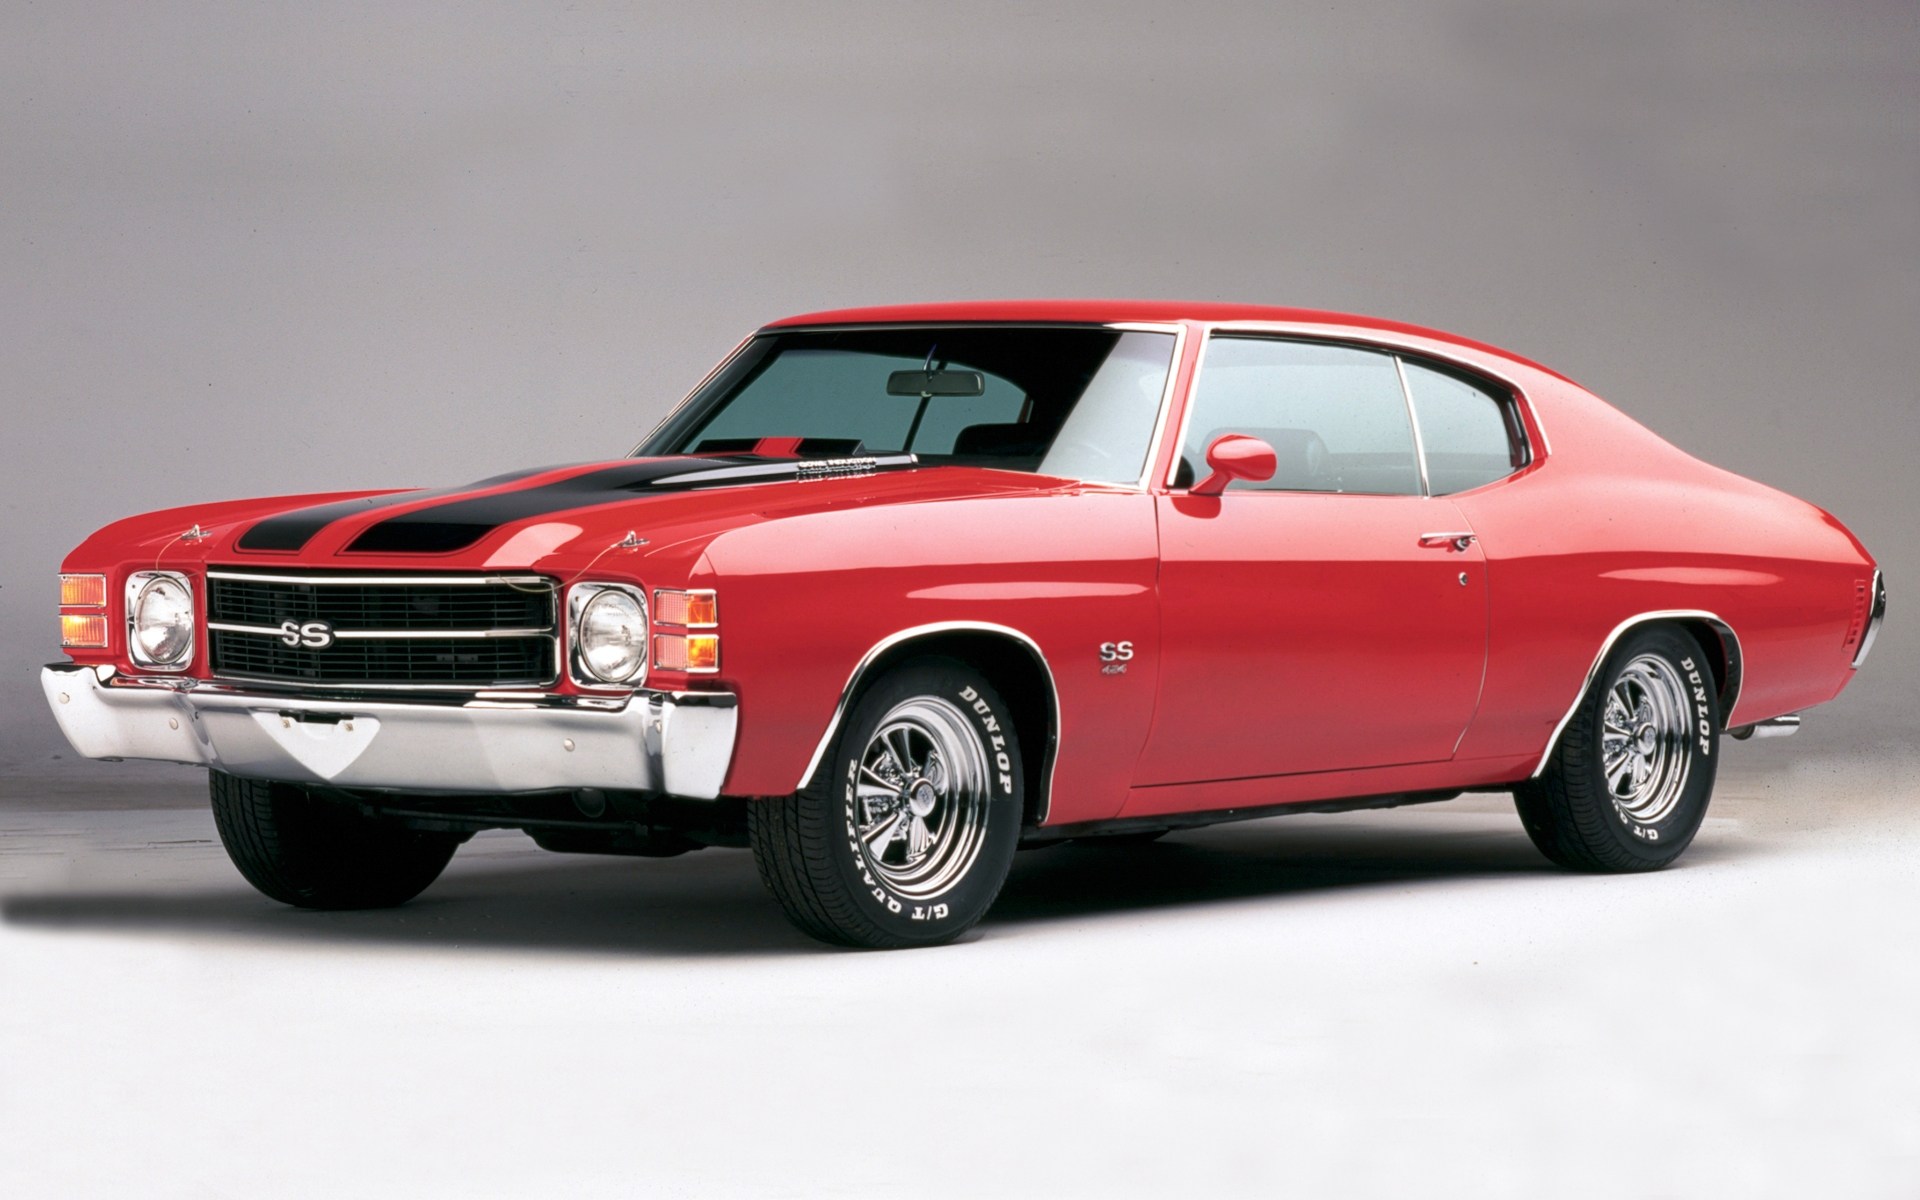 Red Chevelle Background 183 iBackgroundWallpaper